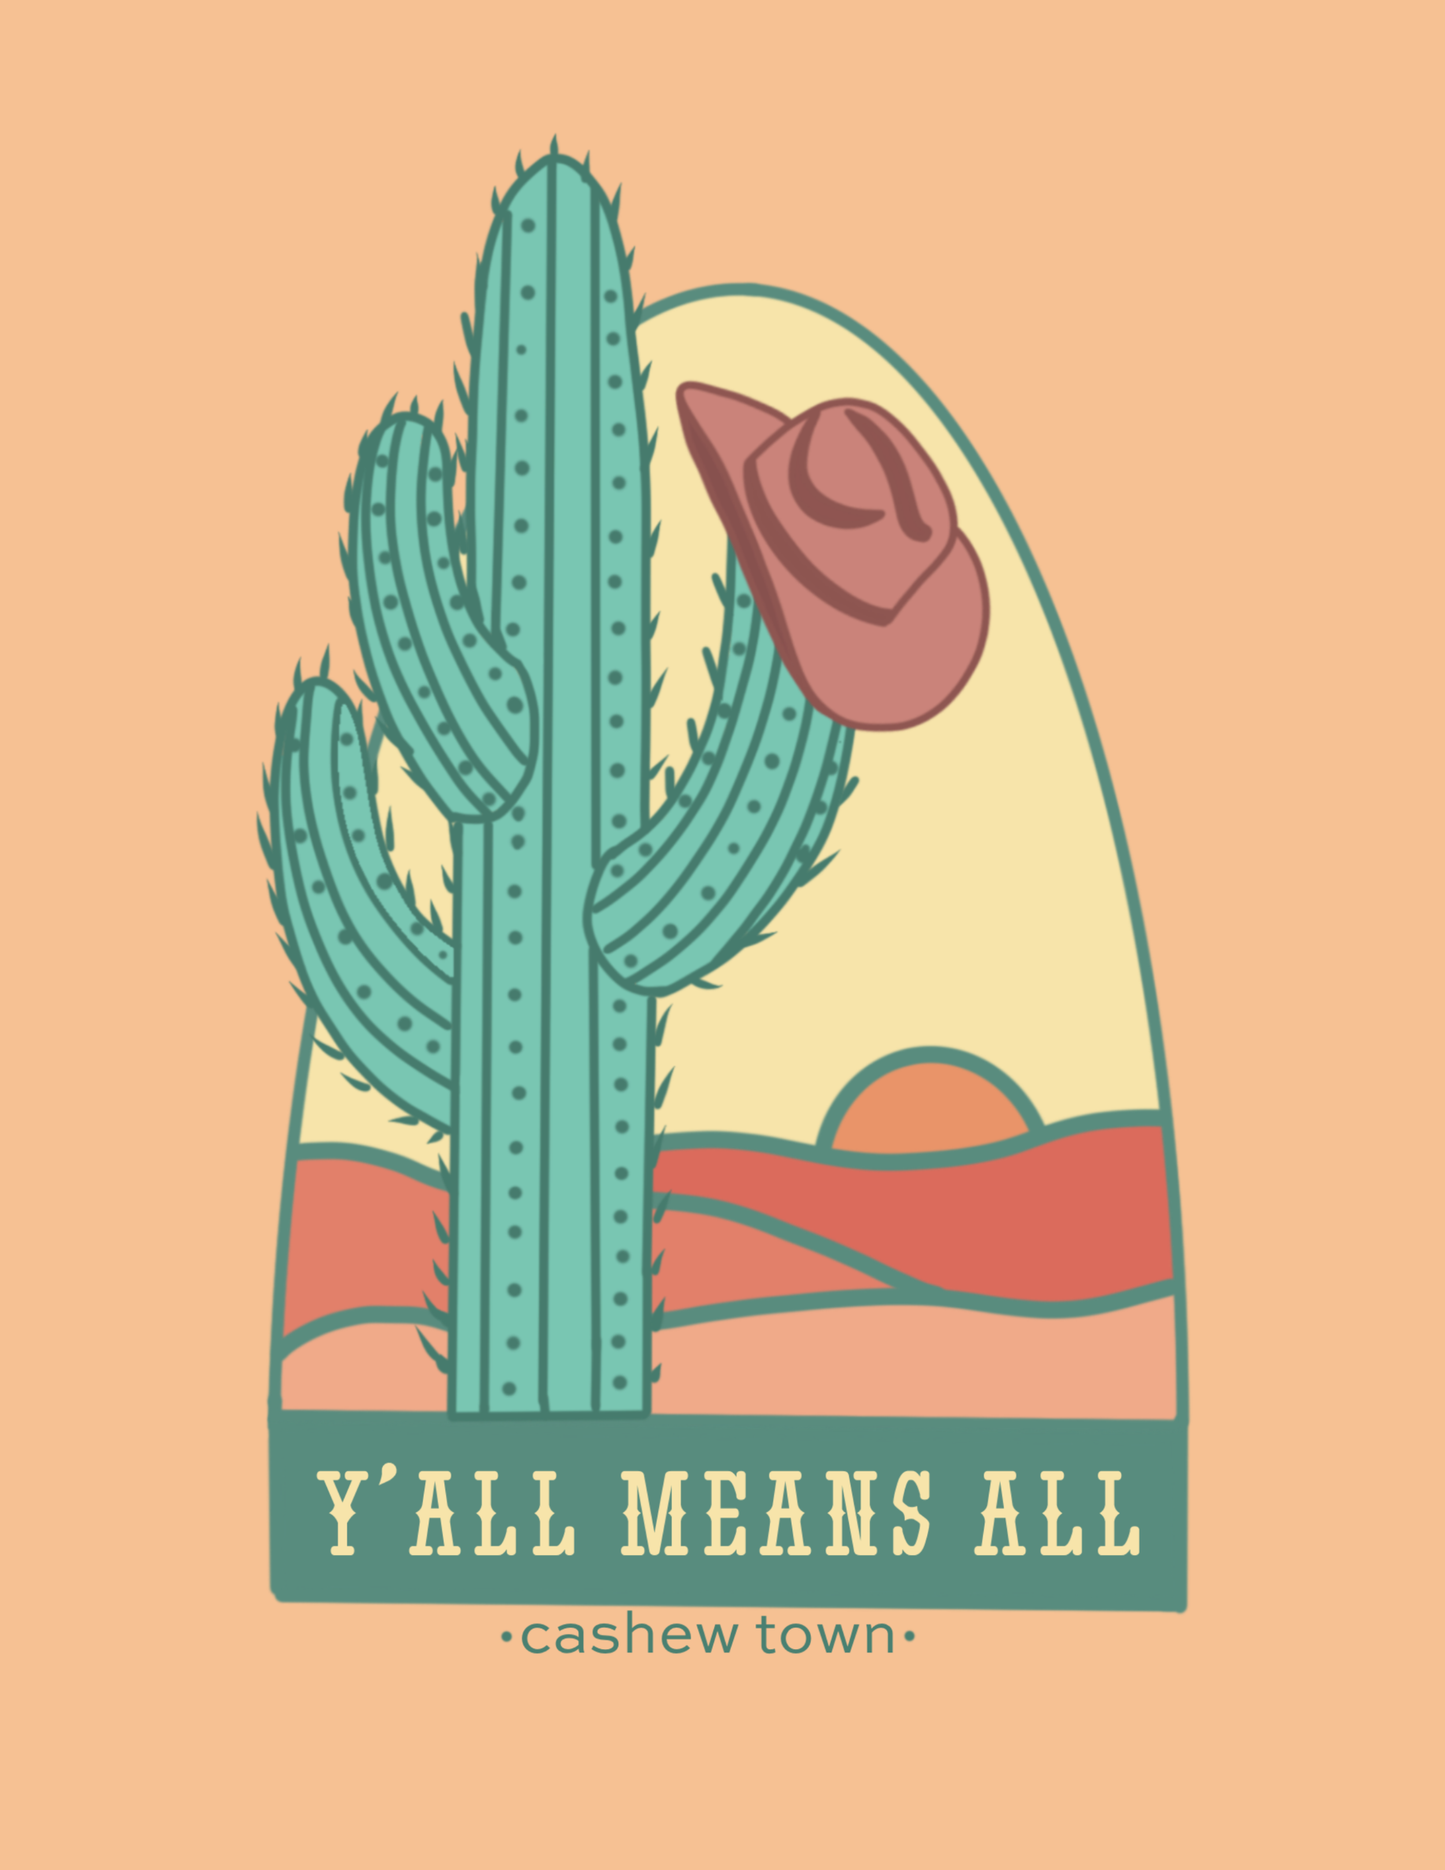 An upclose view of the "Y'all Means All" print. The Y'all Means All Design is logo on a muted pastel orange background. The logo is a drawn green cactus with a muted maroon cowboy hat hanging off the side, in front of a very simple line color fill of a landscape with "Y'ALL MEANS ALL" underneath & "cashew town" in small letters under the design.